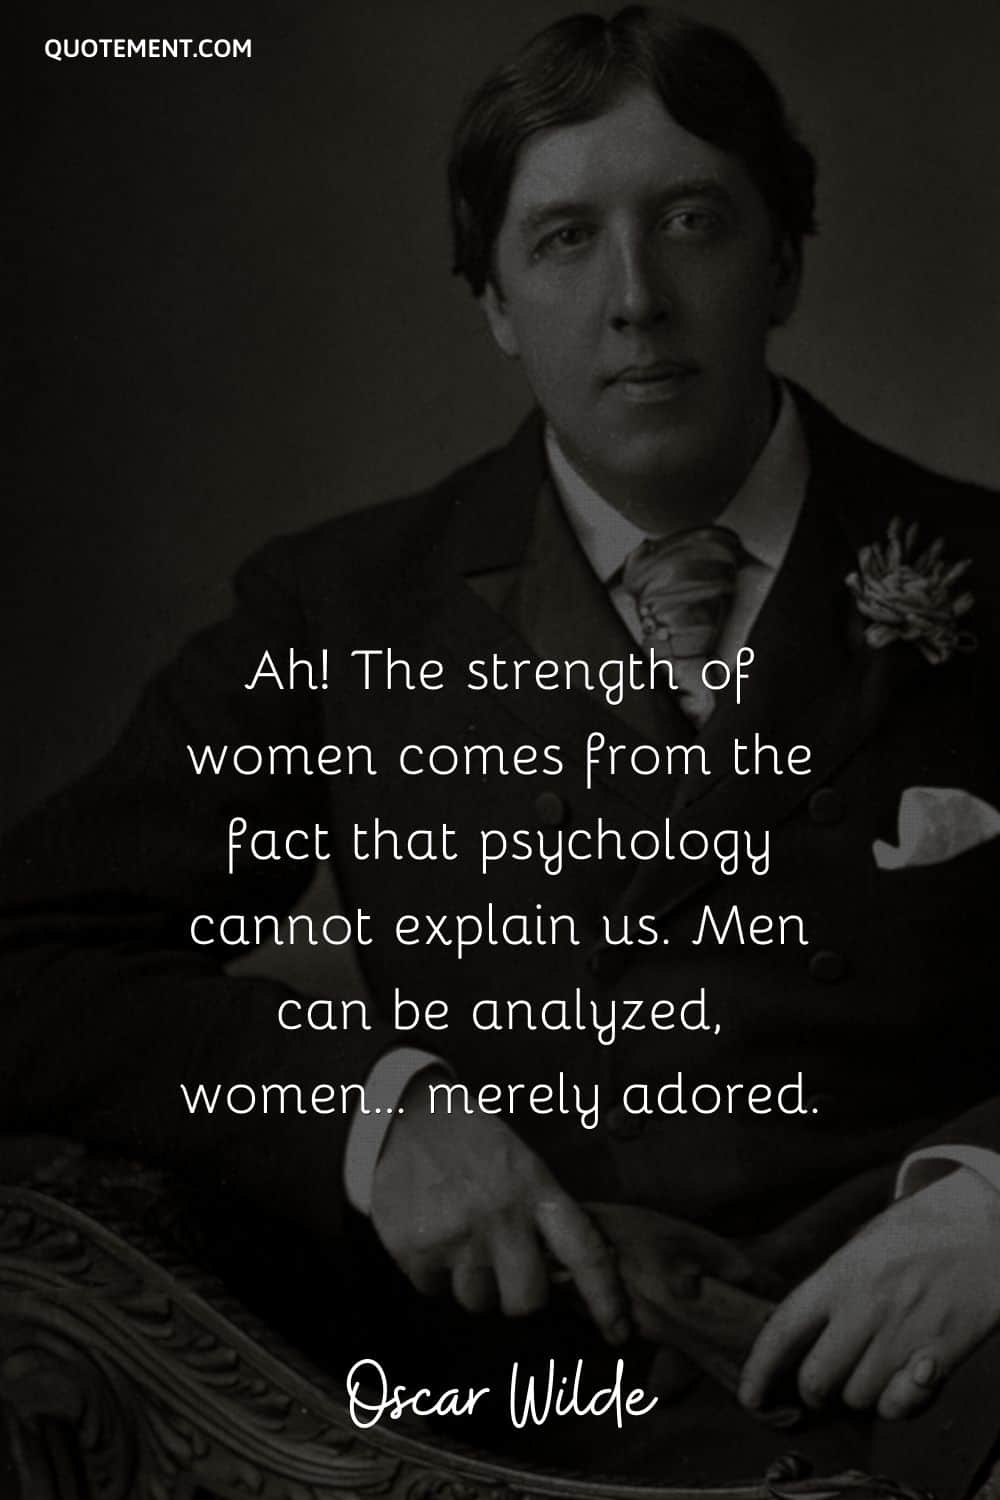 The strength of women comes from the fact that psychology cannot explain us